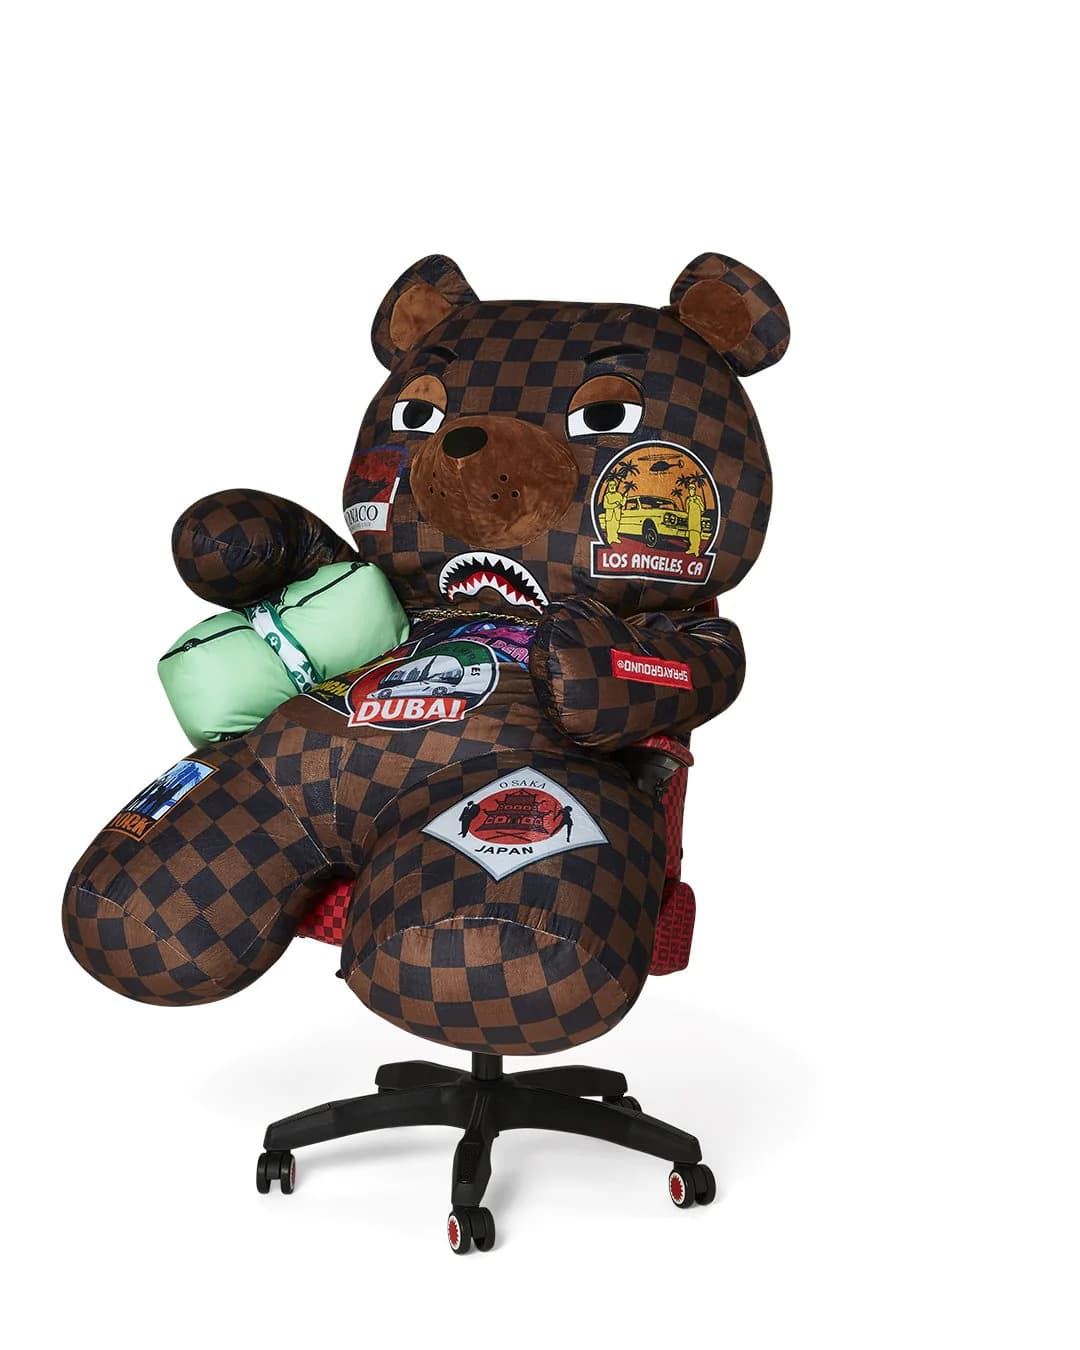 Oso Sprayground 910B5228NSZ Largest bear in the world backpack - Imagen 3